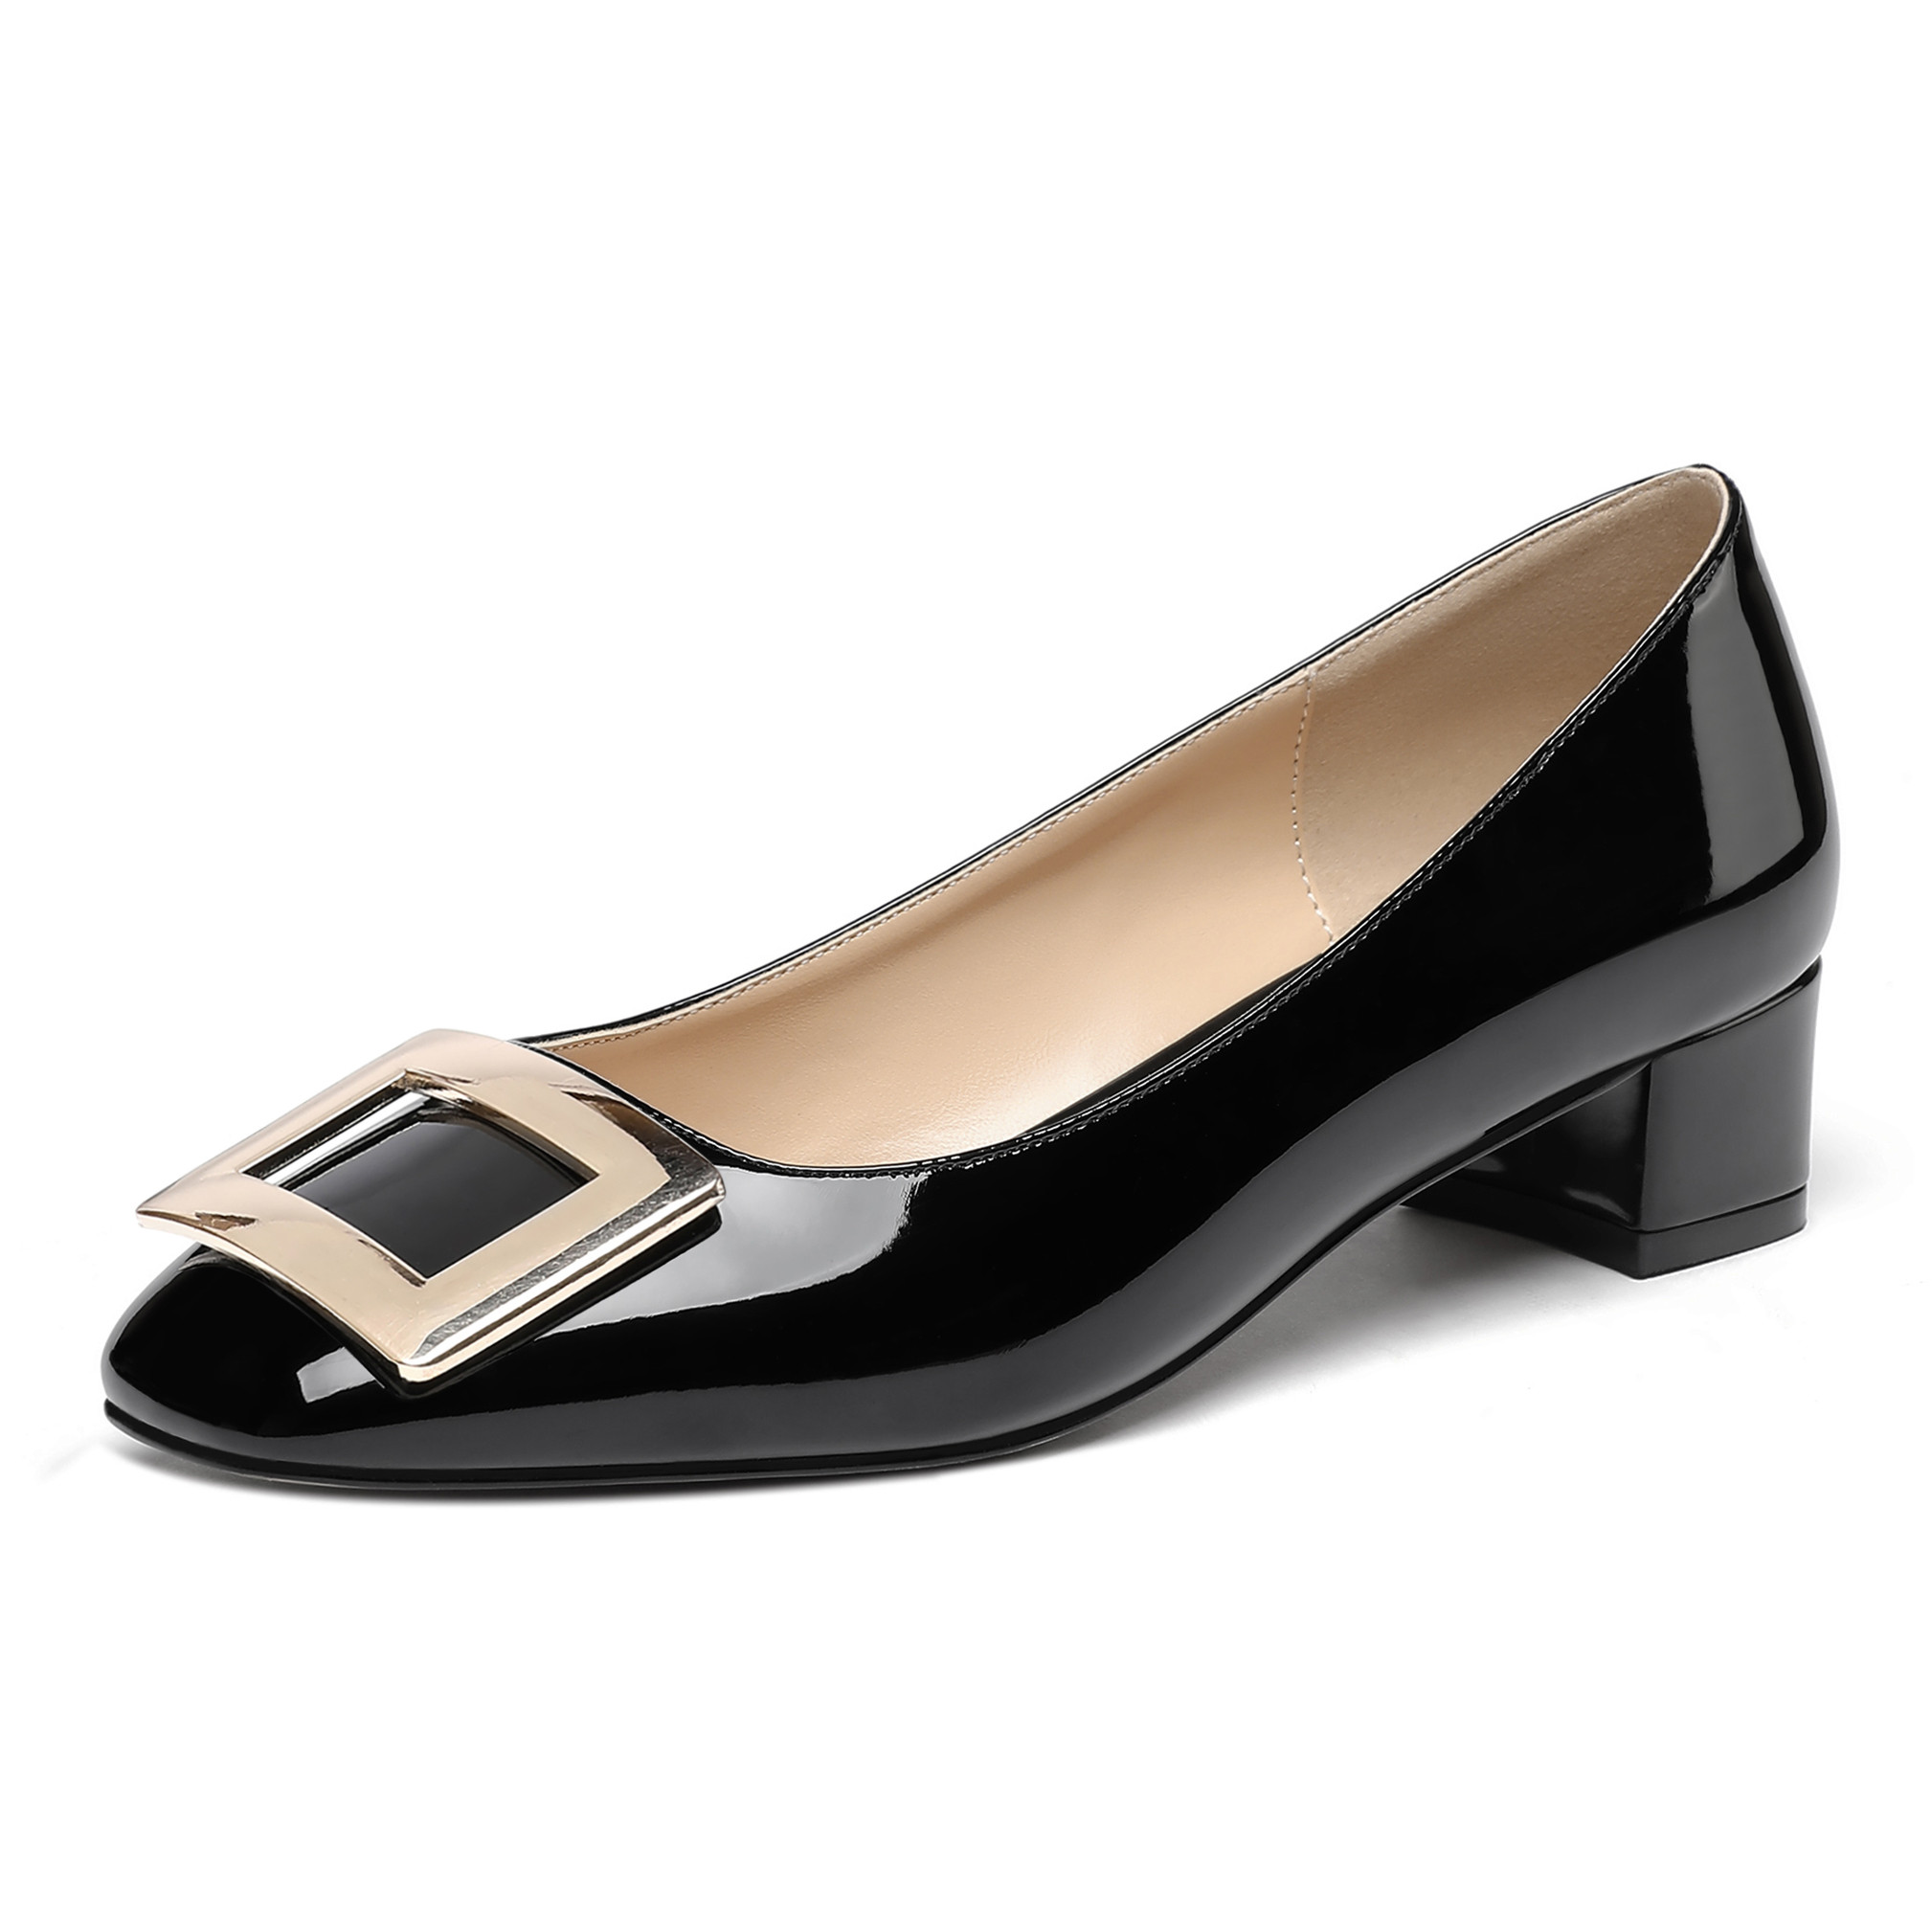 Maritza Formal Pumps with Square Metal Accessory